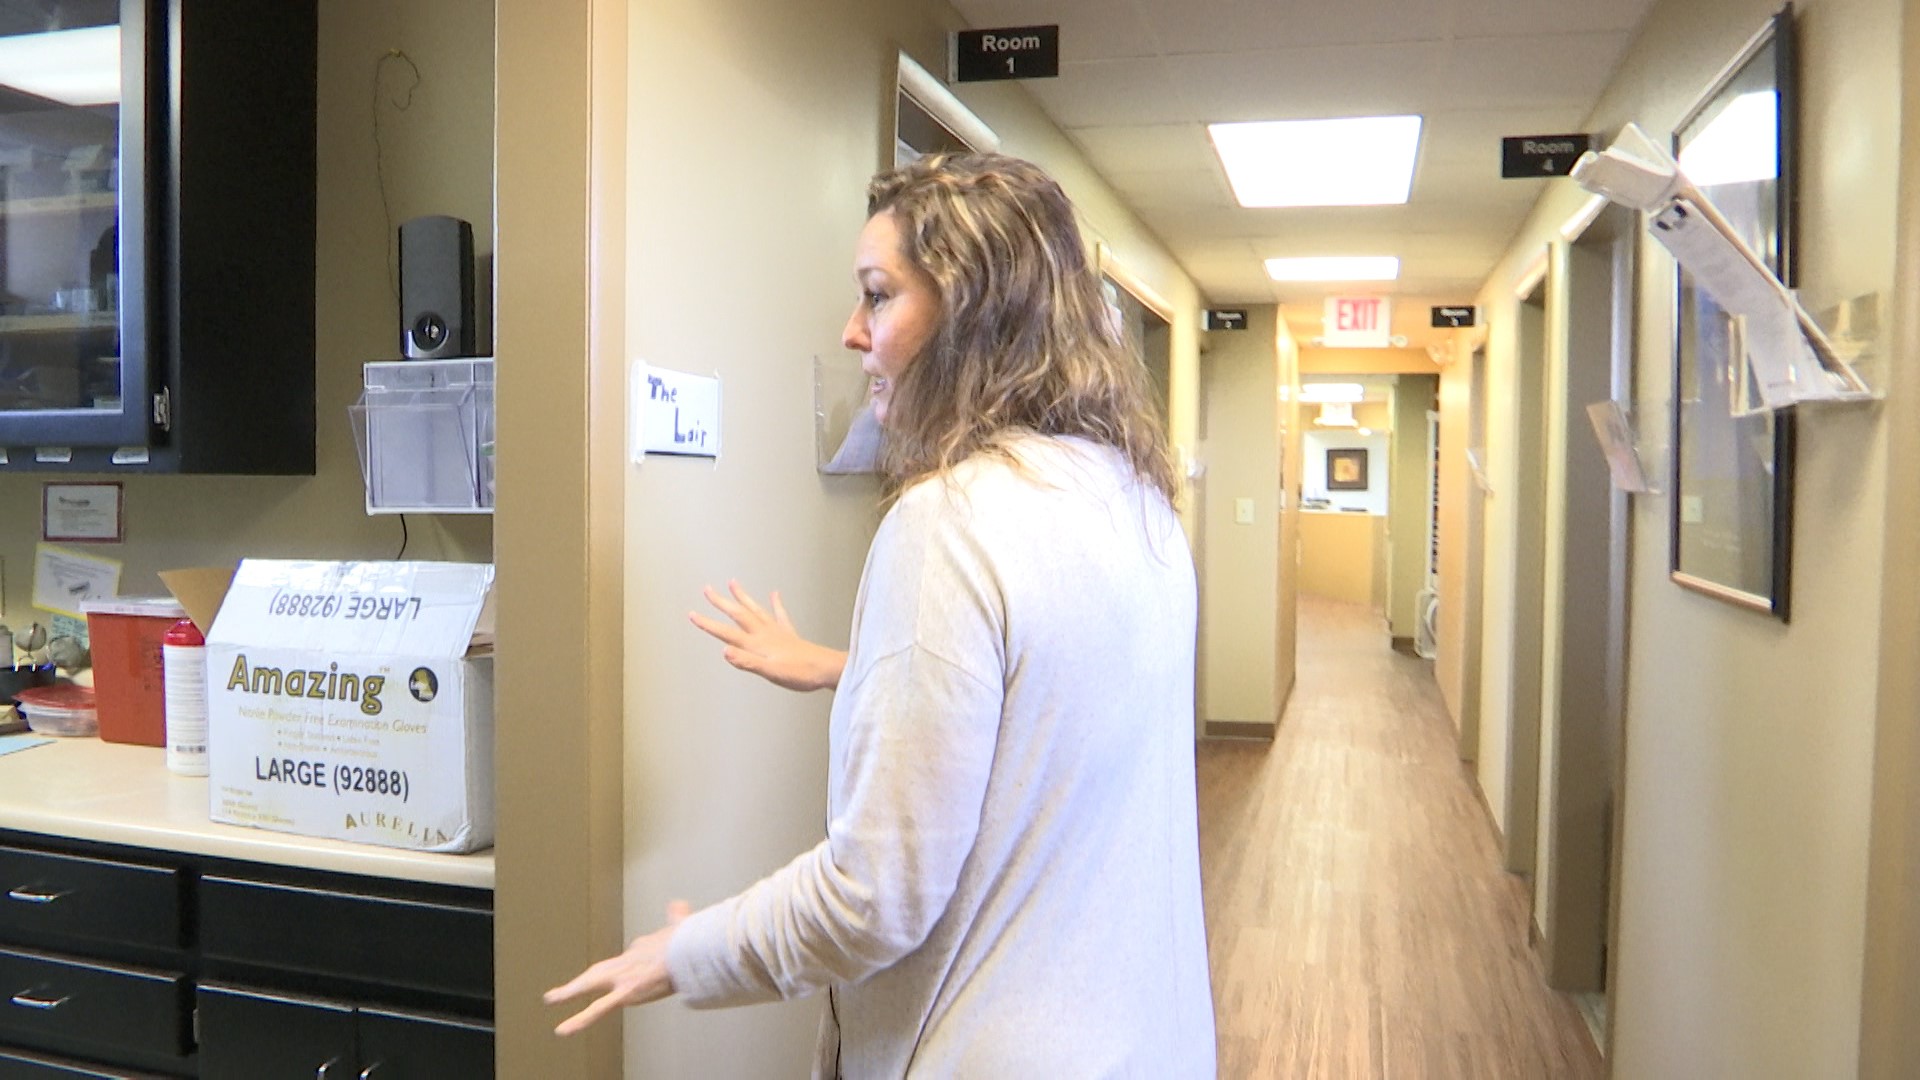 The Community Free Dental Clinic Executive Director, Julia Nabors, talks about what they do to help people get the dental assistance they need.